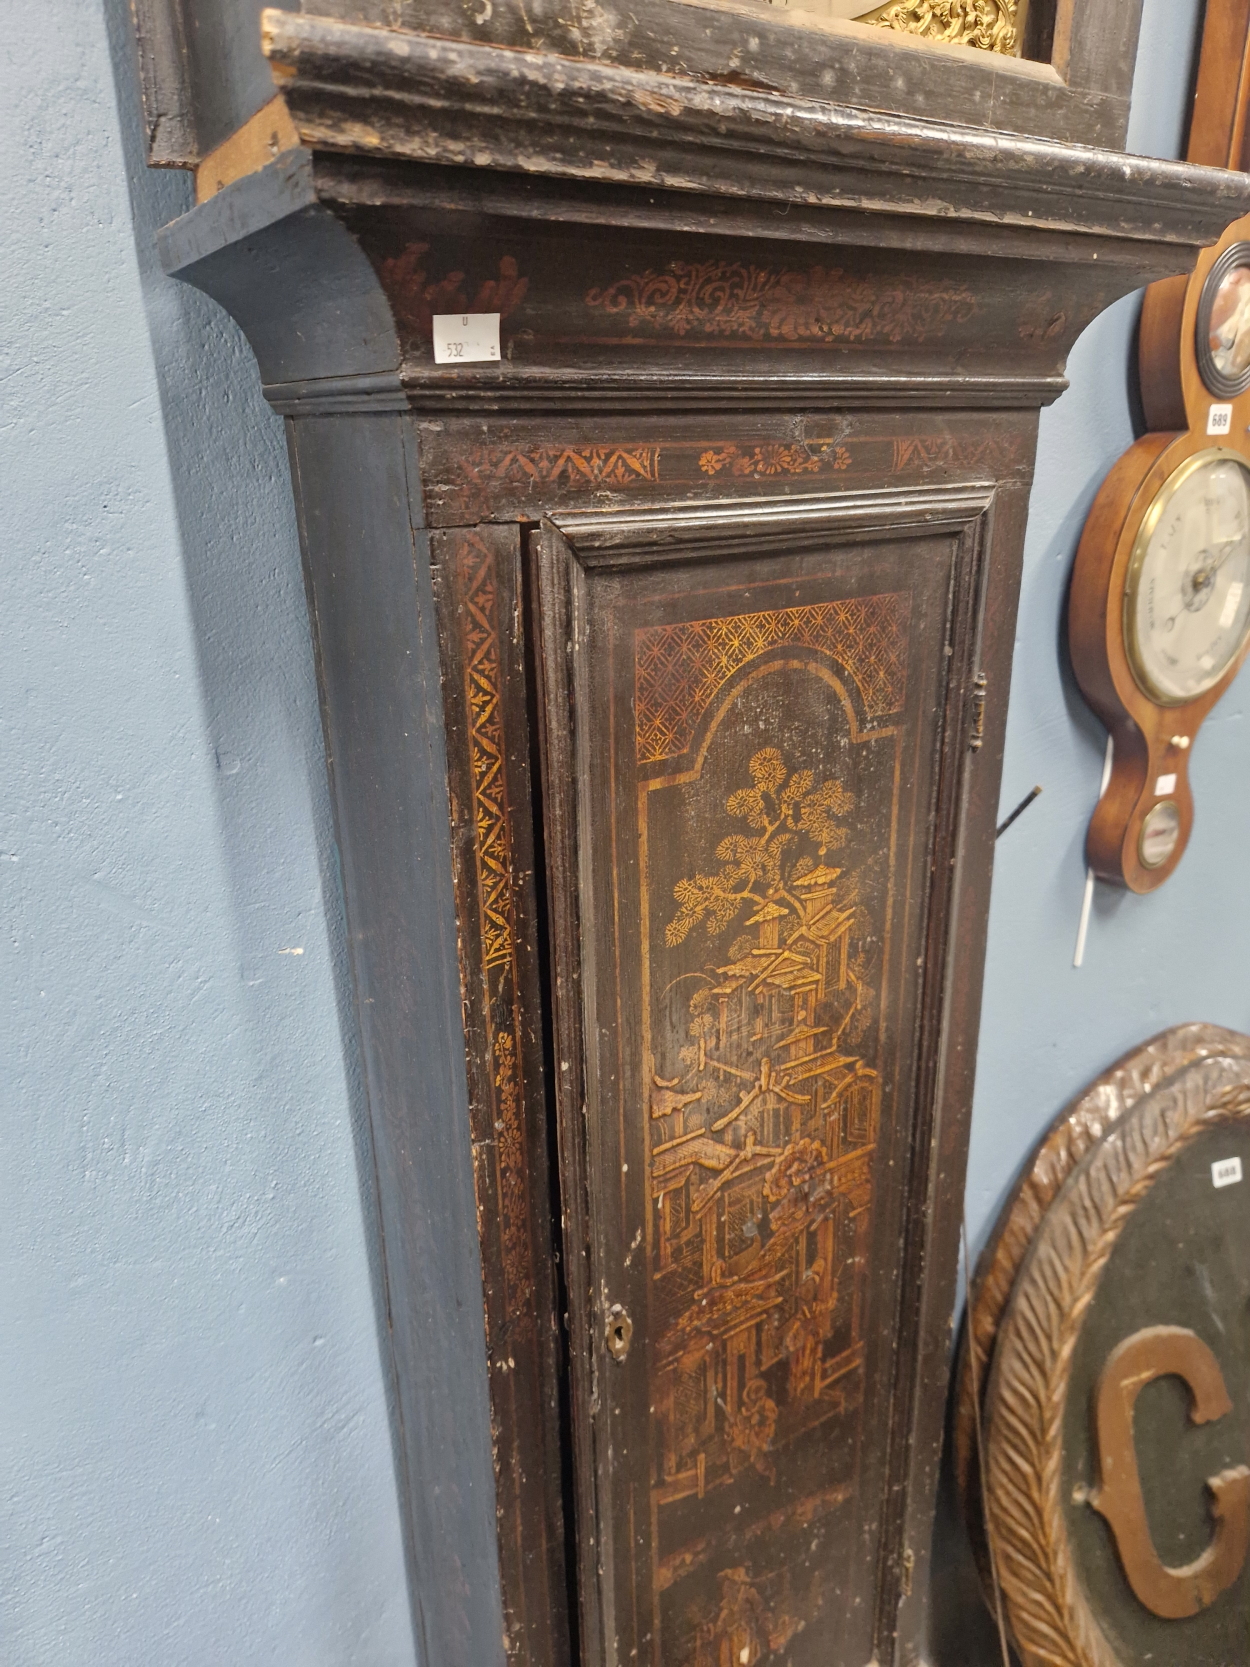 A LATE 18th C. CHINOISERIE BLACK LACQUER LONG CASED CLOCK, THE SQUARE DIAL WITH SUBSIDIARY SECONDS - Image 3 of 5